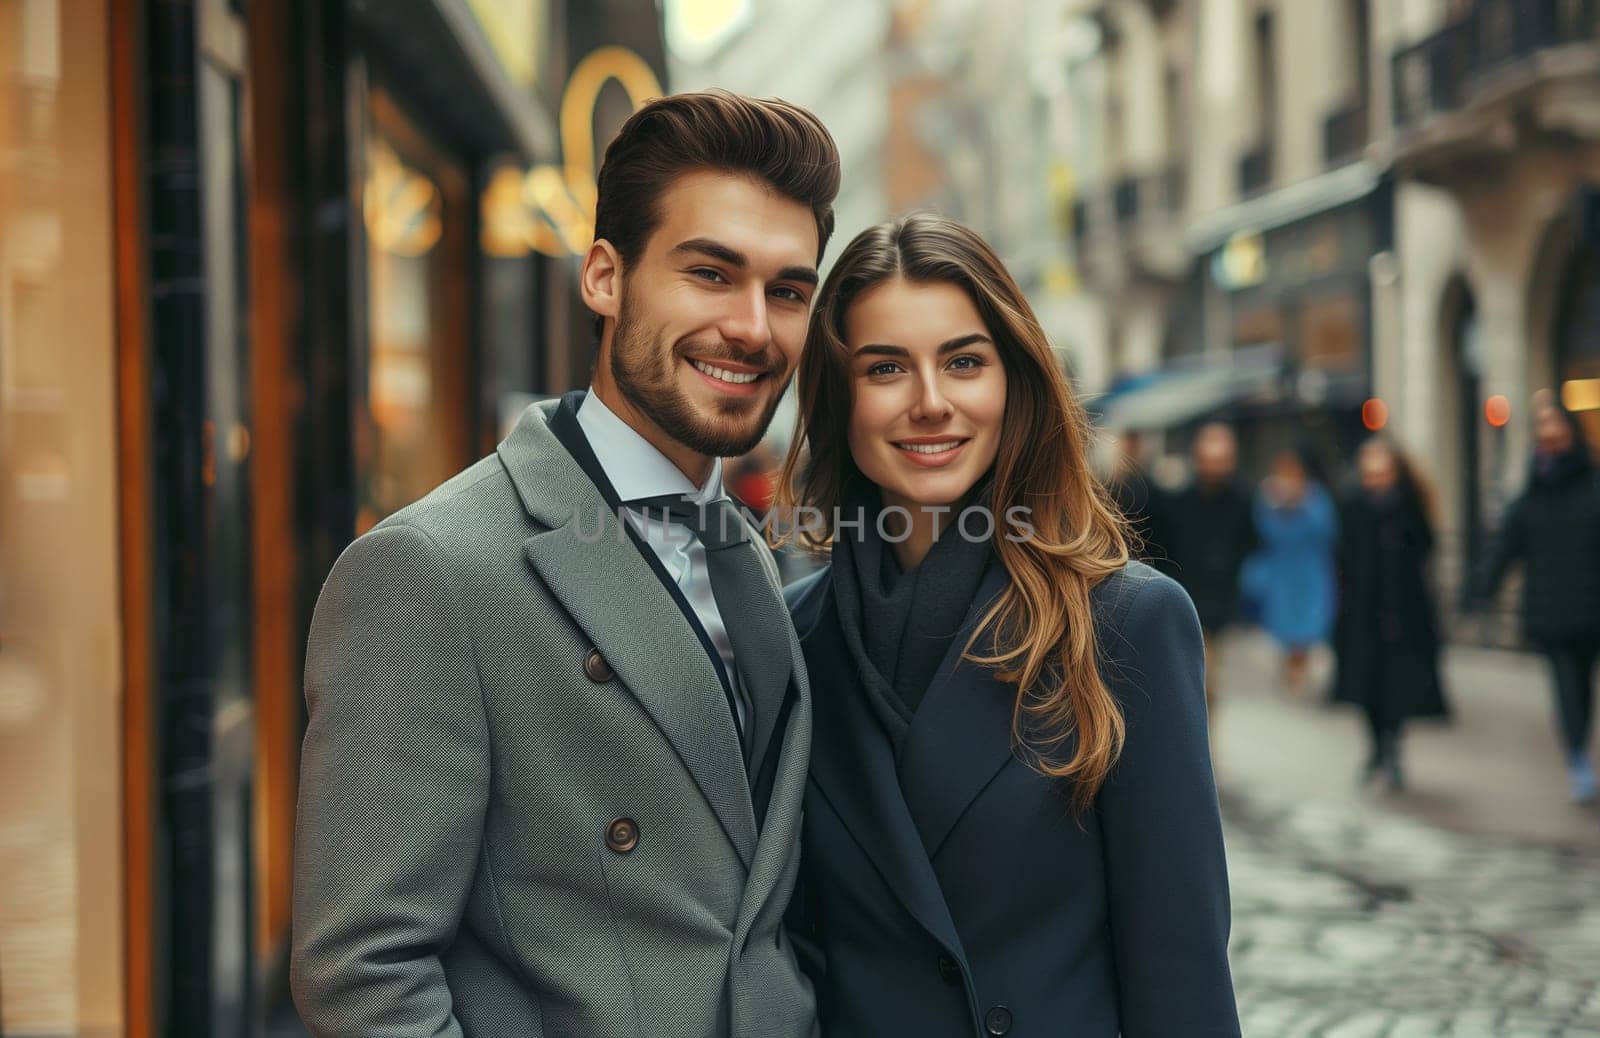 Fashionable portrait of stylish beautiful woman and man in suit, modern happy smiling young couple posing together on city street